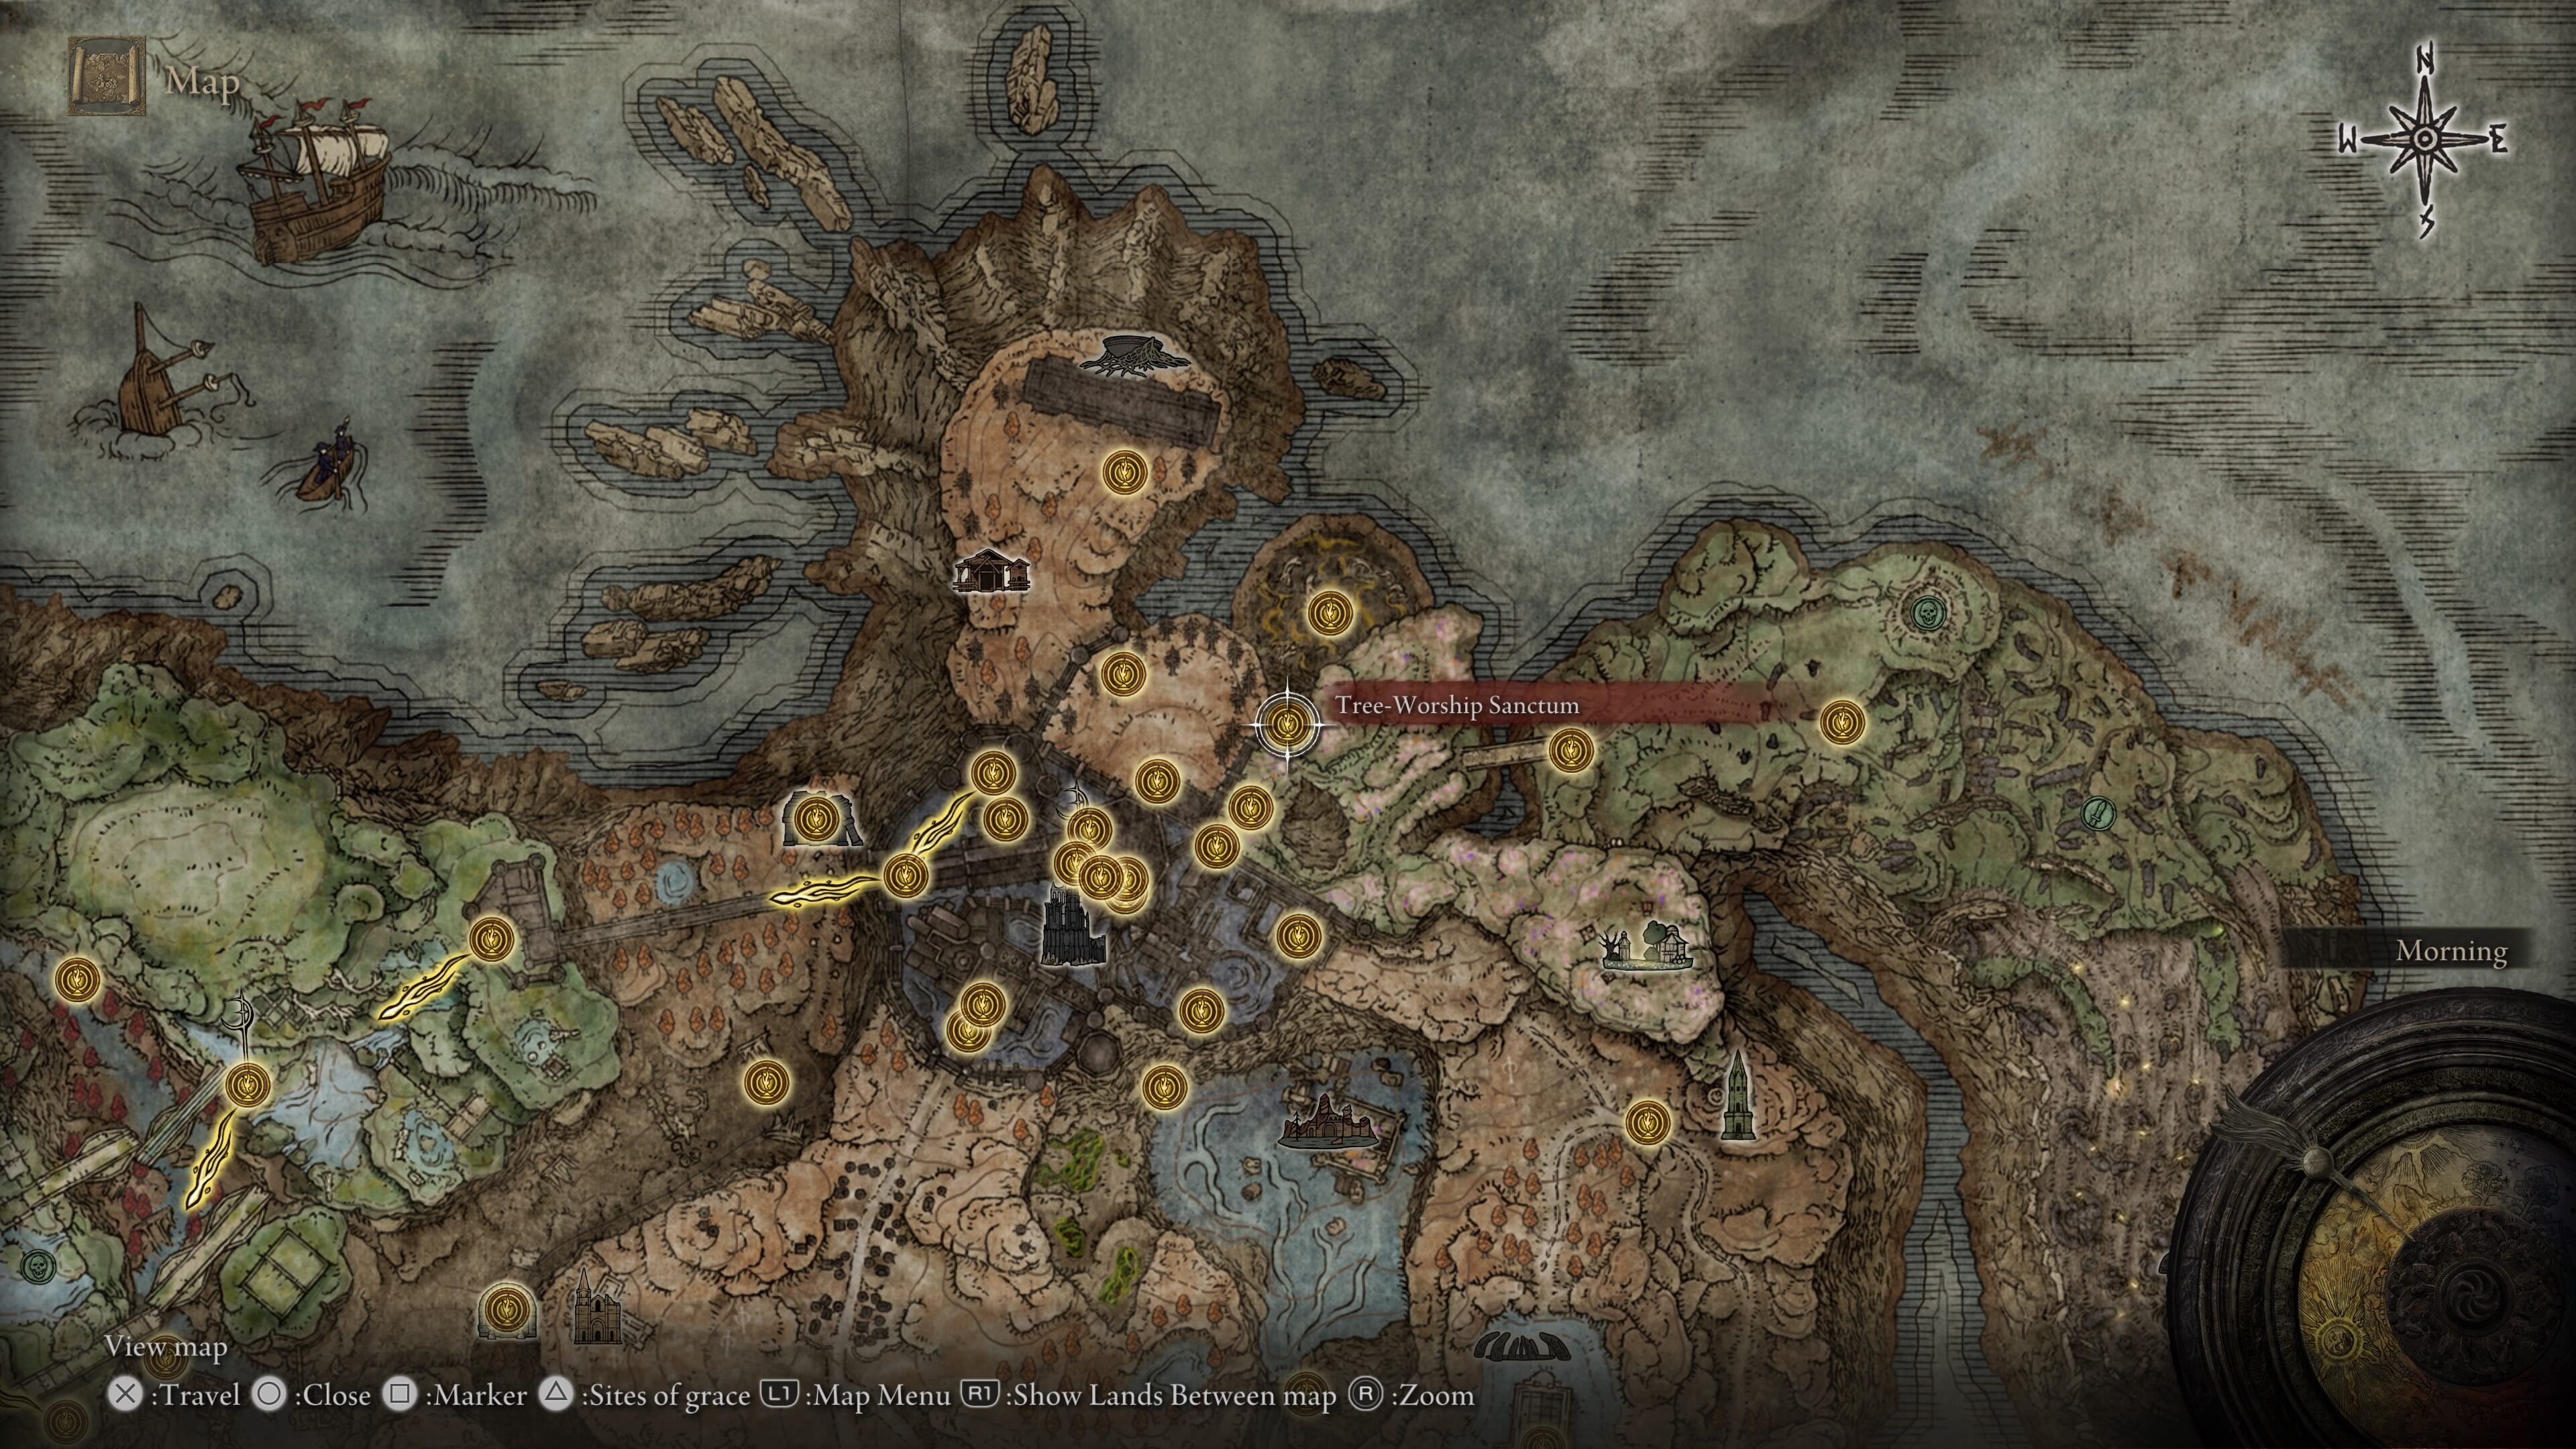 elden ring scadutree avatar boss guide how to beat - a map of the game showing a location